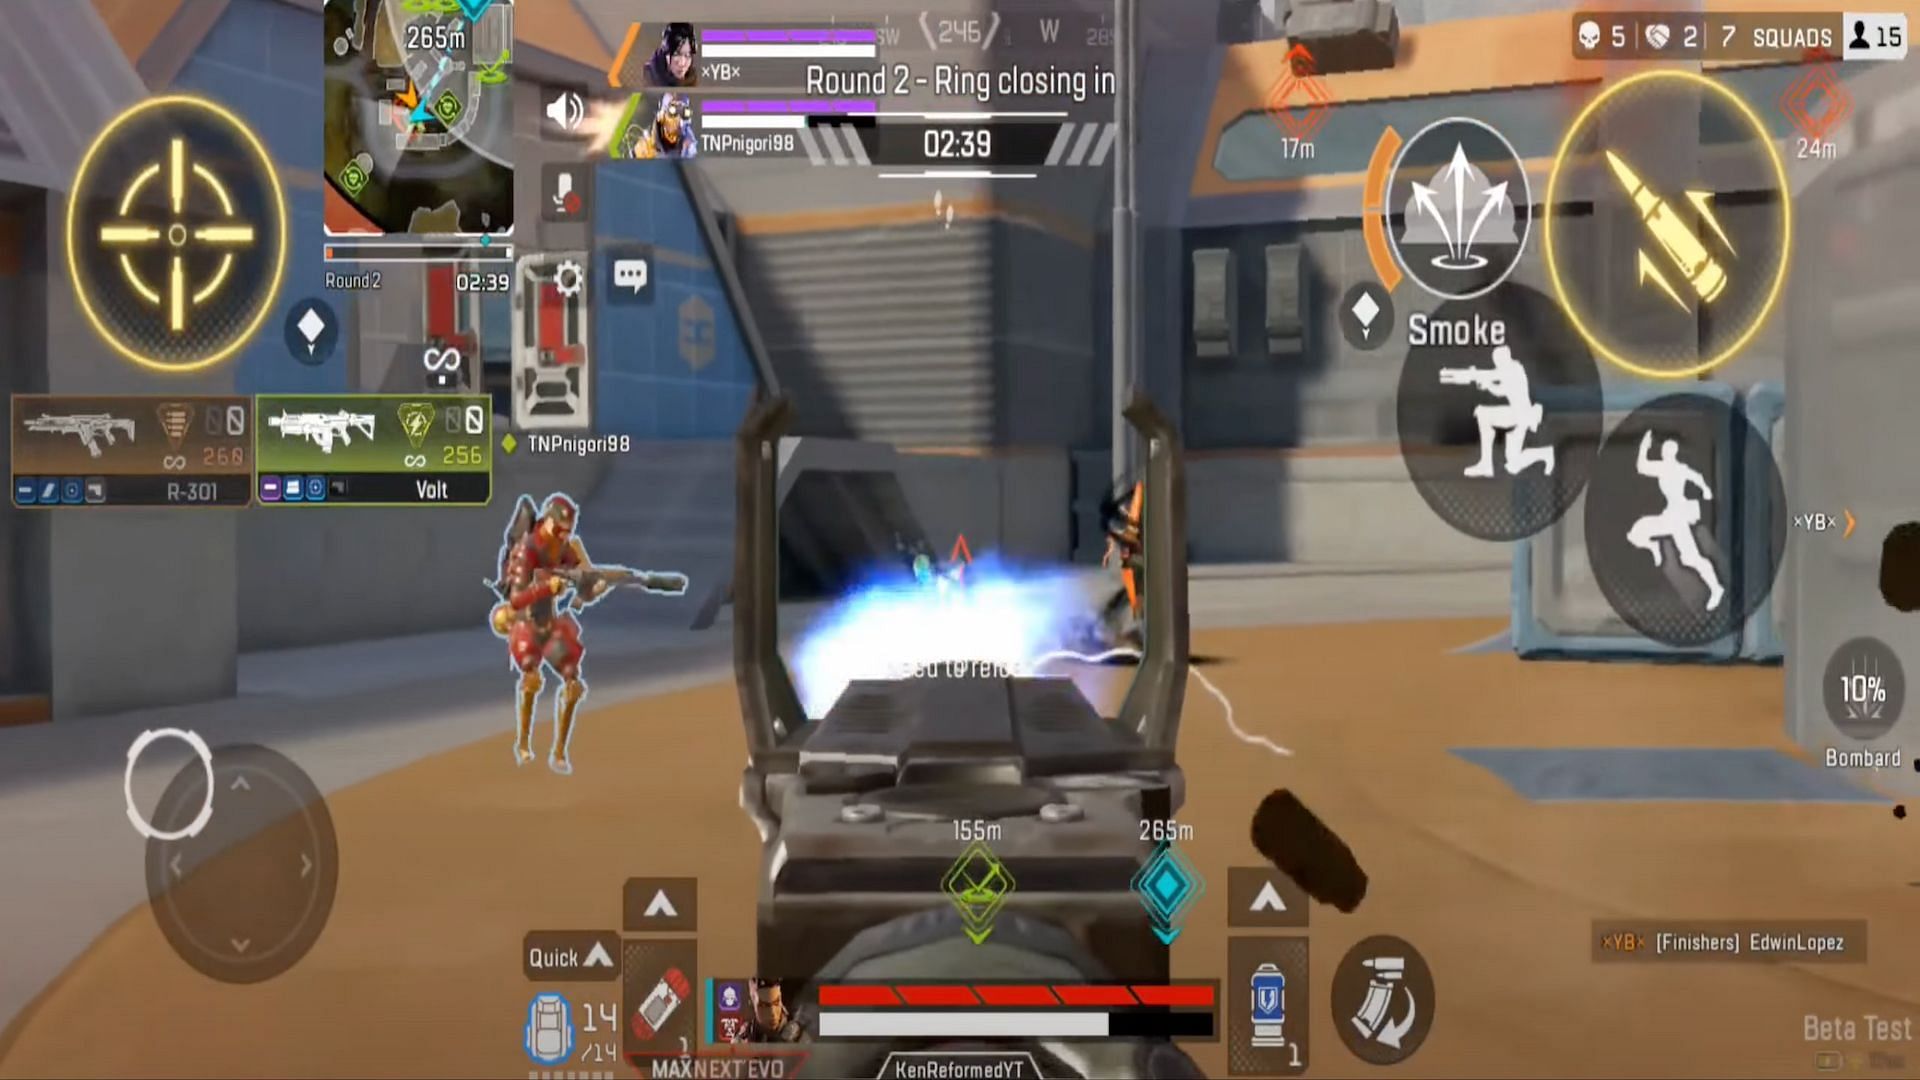 Players can use Submachine Guns to dominate their foes in Apex Legends Mobile (Image via KenStrafes/YouTube)